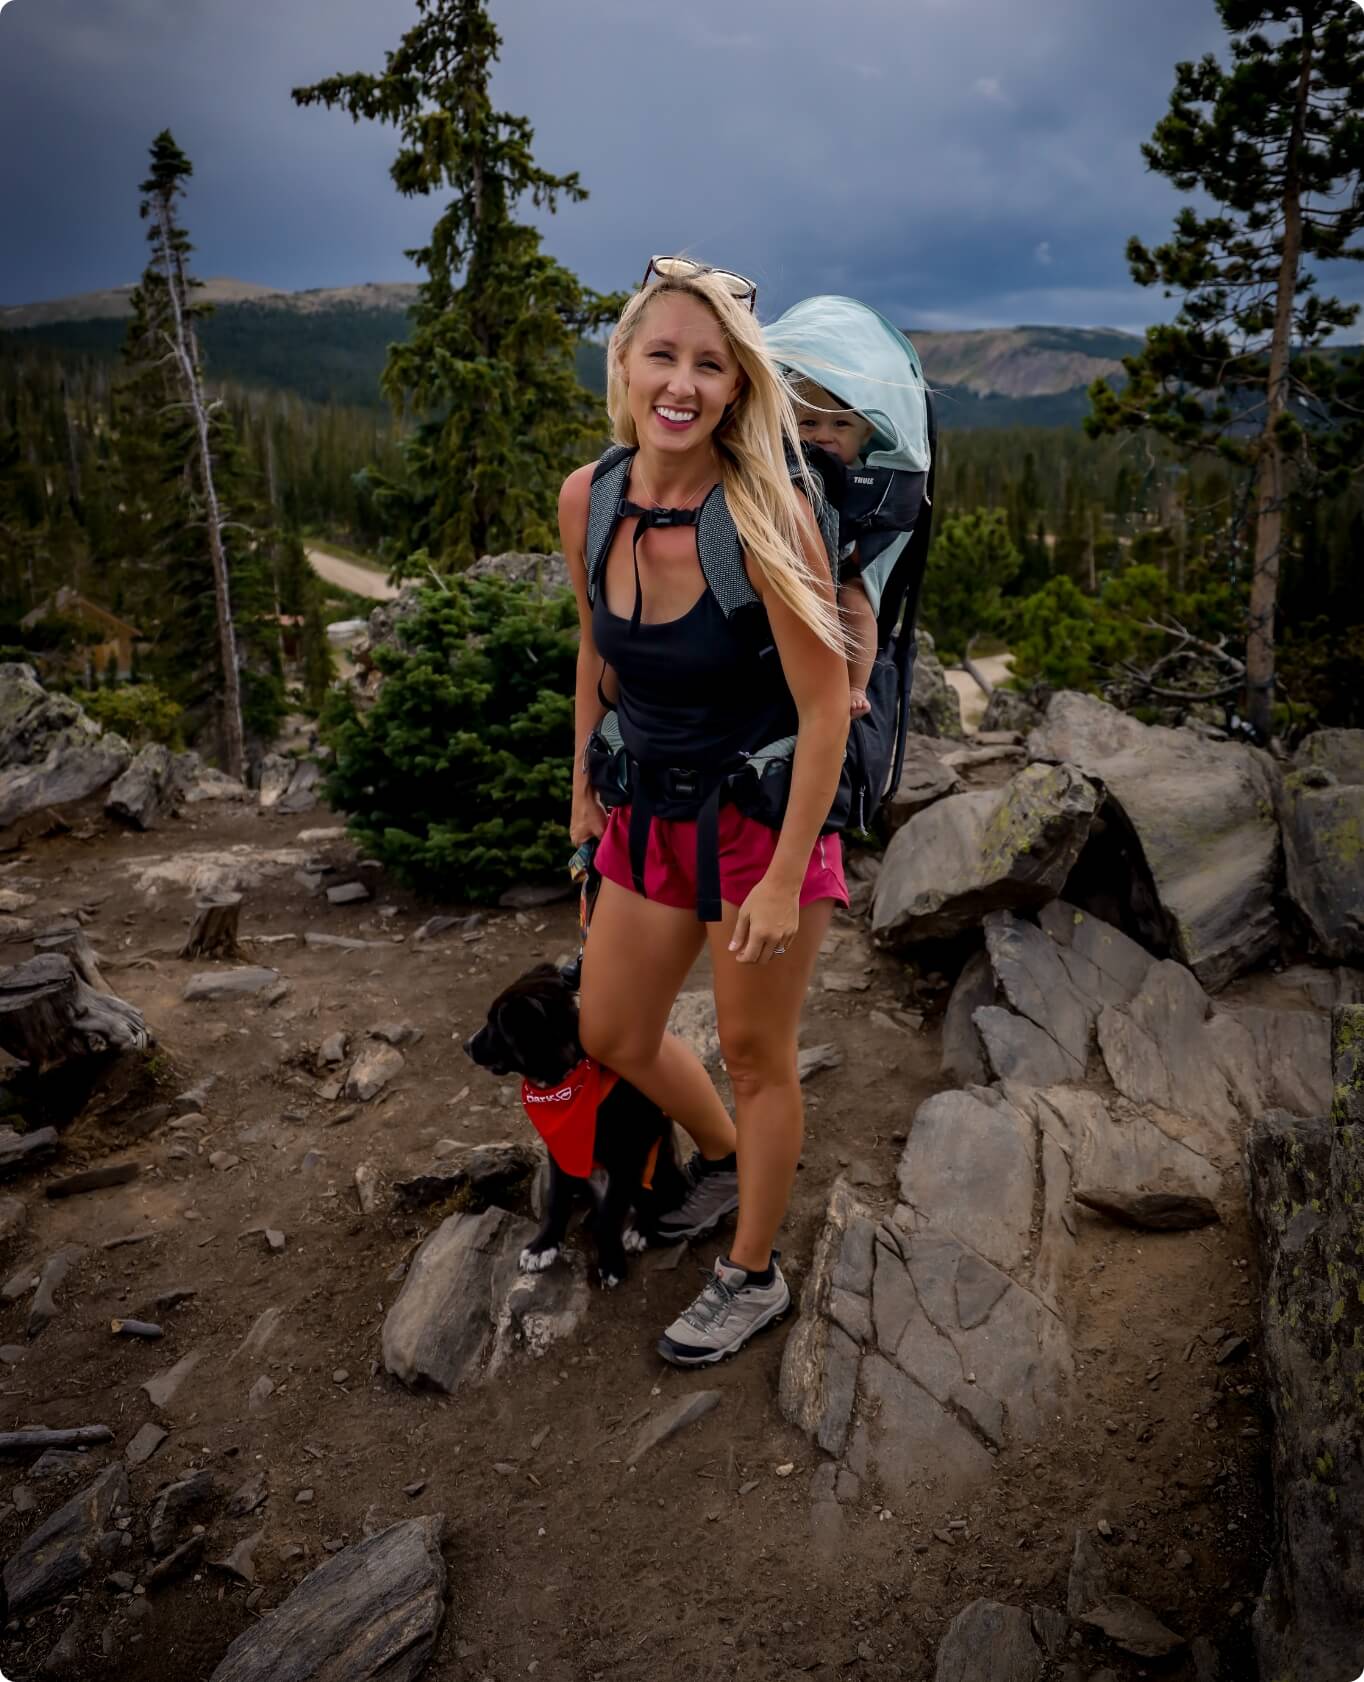 Brooke Baron on the trail in Merrell gear.